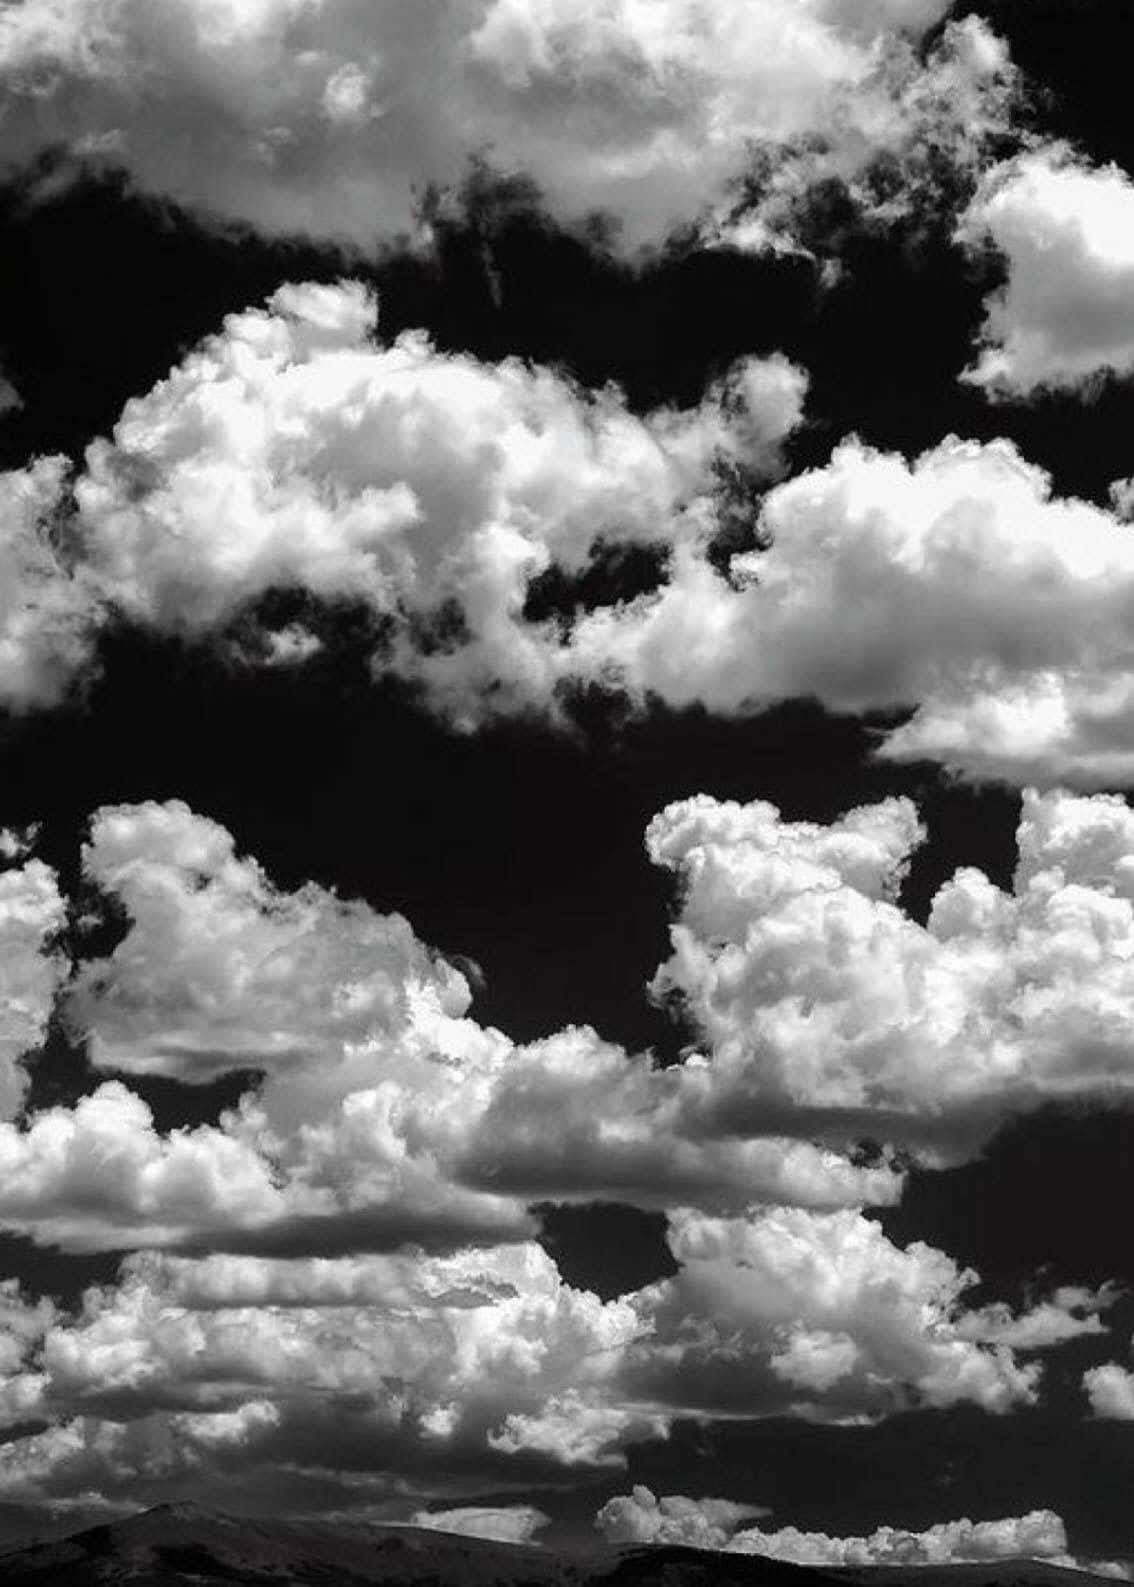 Scattered Black Clouds In The Sky Wallpaper